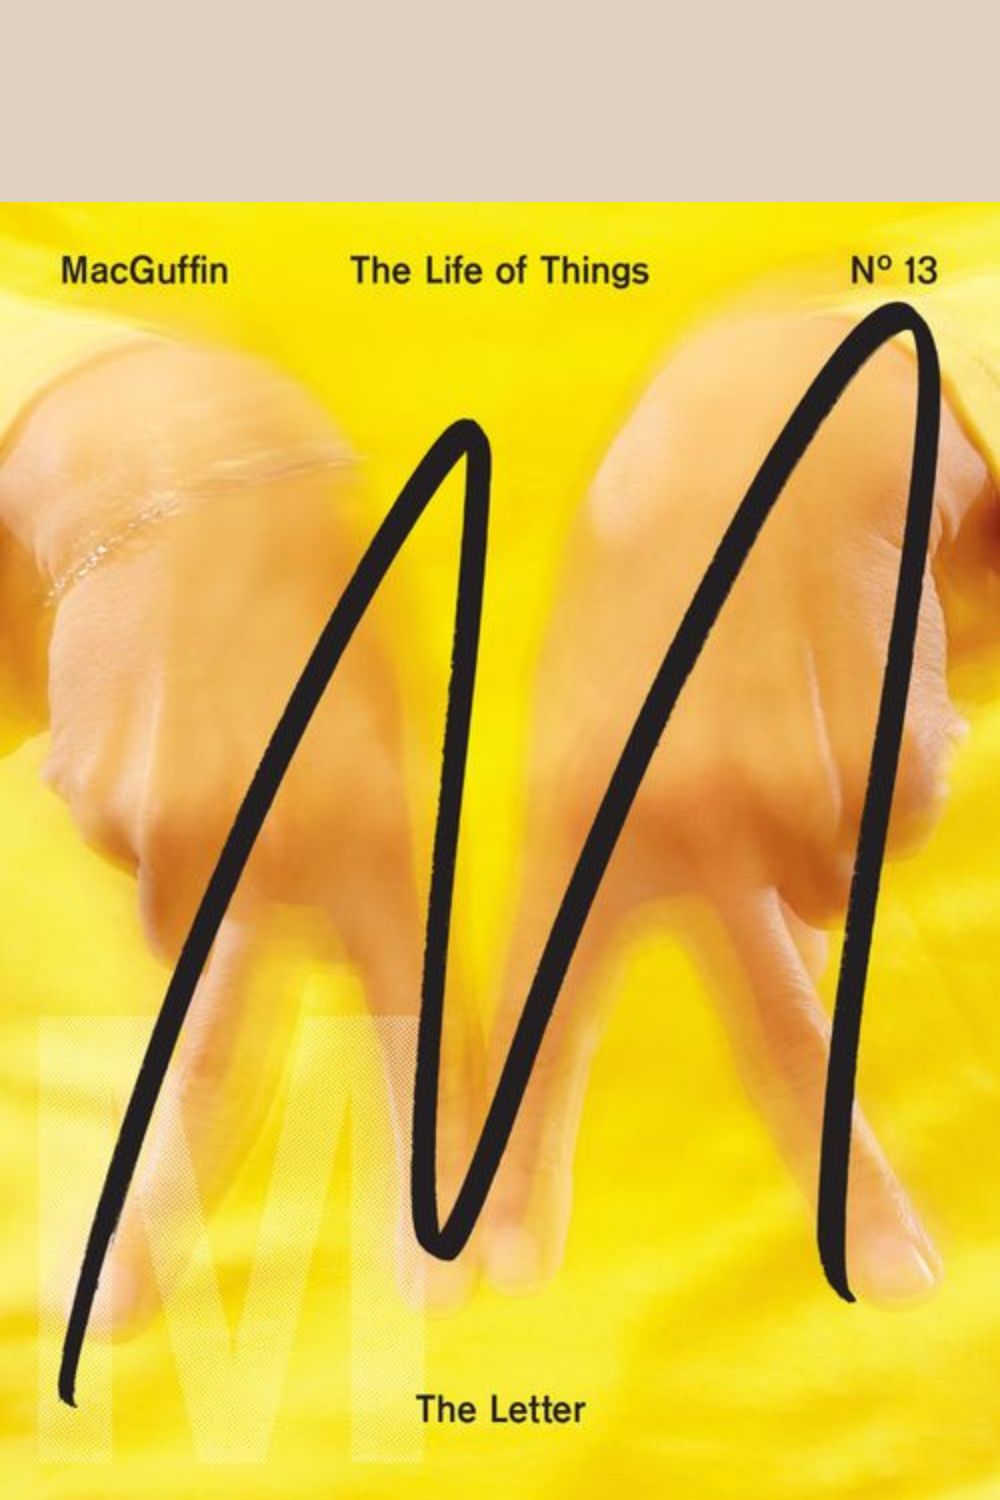 MacGuffin Magazine cover No. 13 The Letter